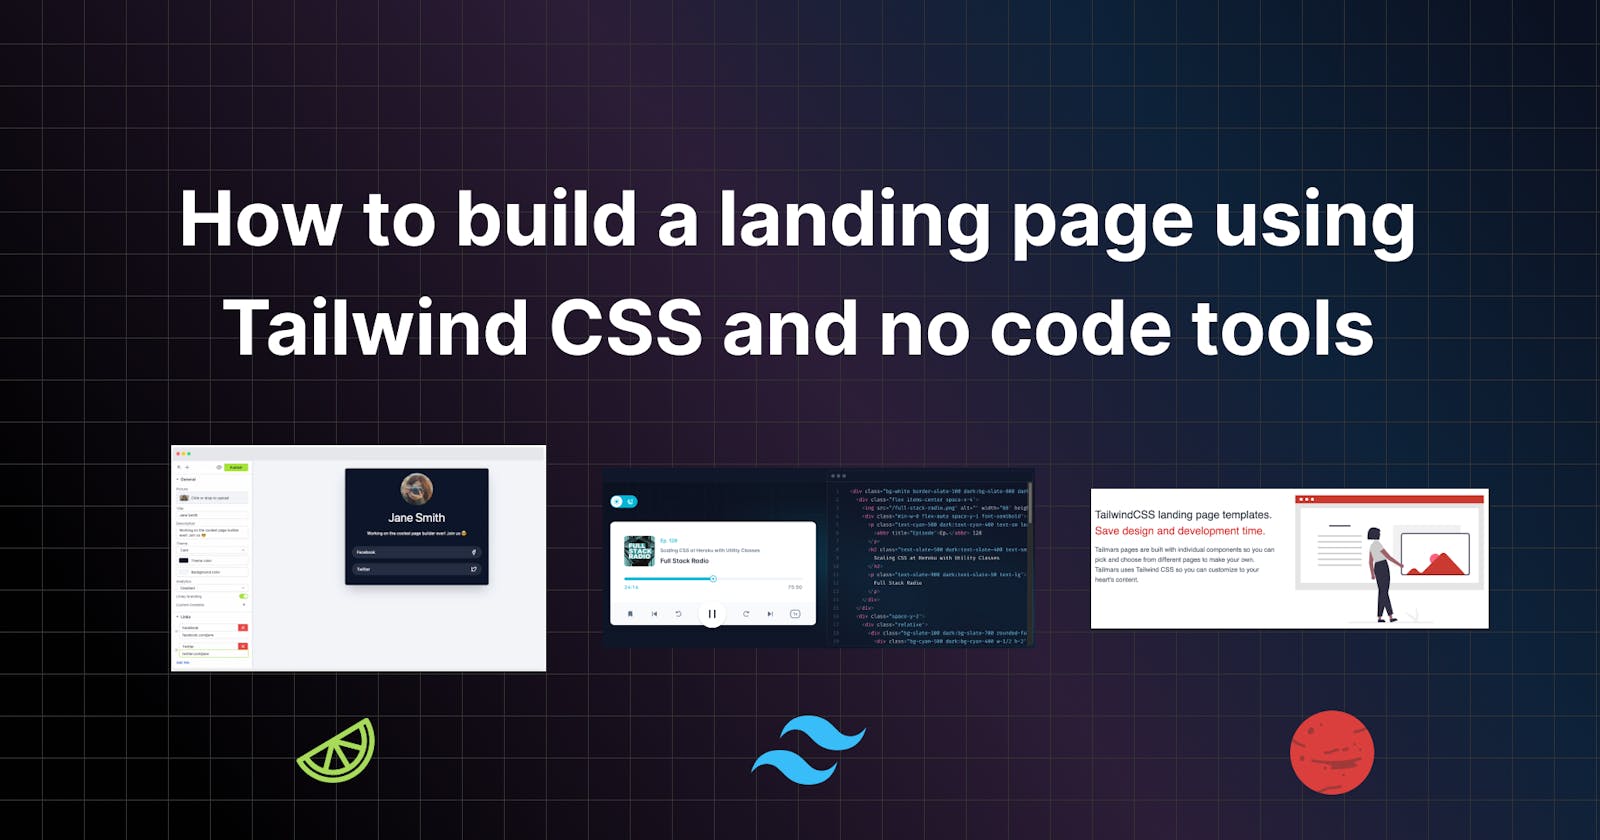 How to build a landing page using Tailwind CSS and no code tools